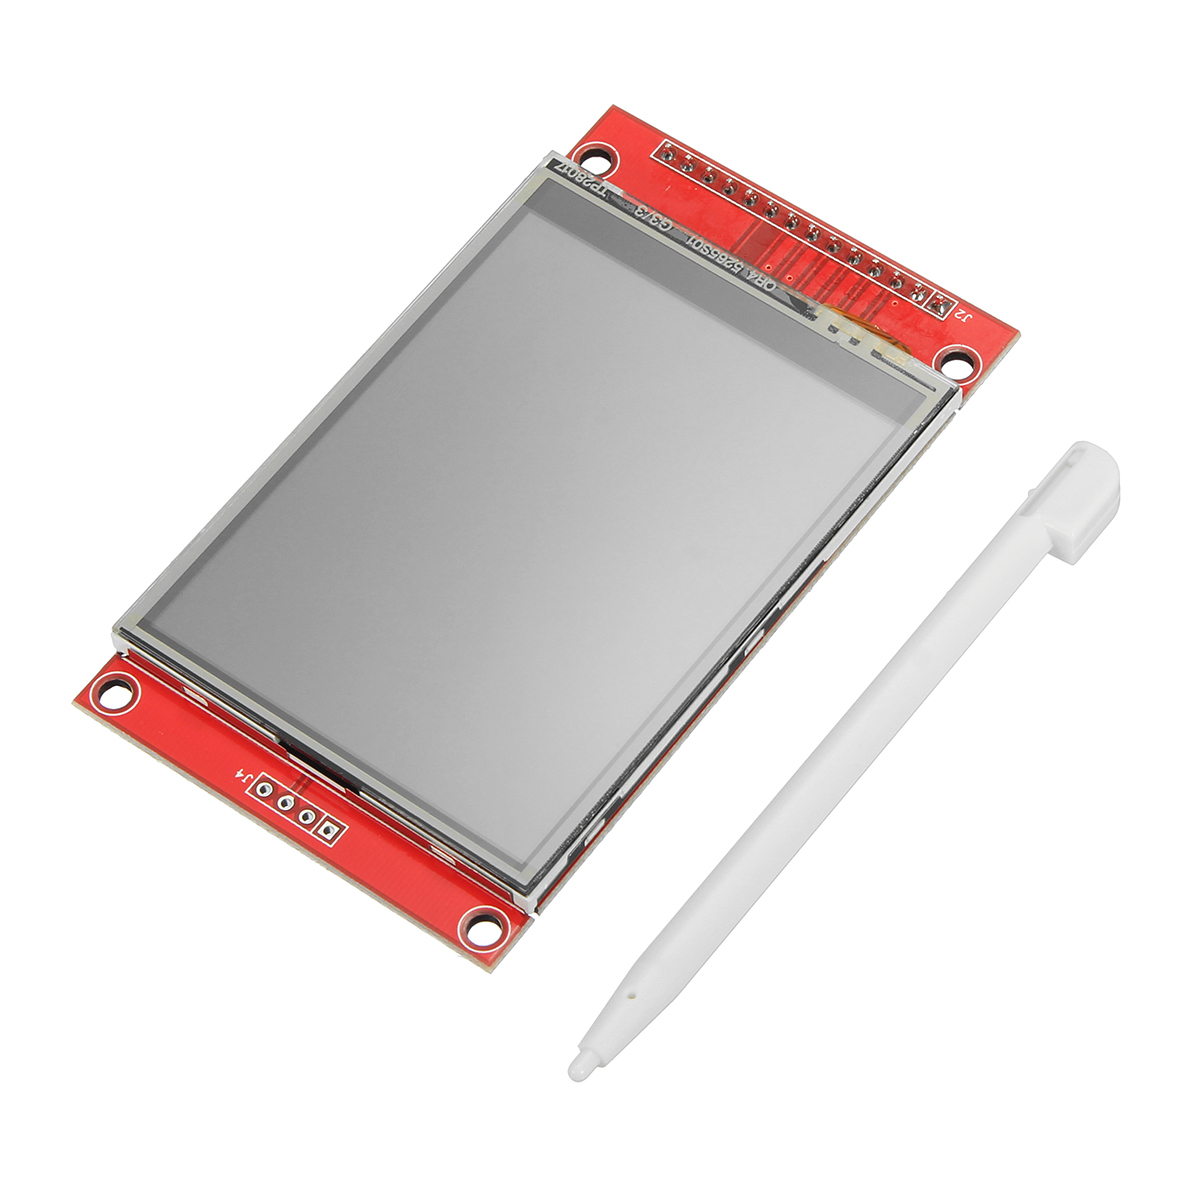 2.8 Inch ILI9341 240x320 SPI TFT LCD Display Touch Panel SPI Serial Port Module 2